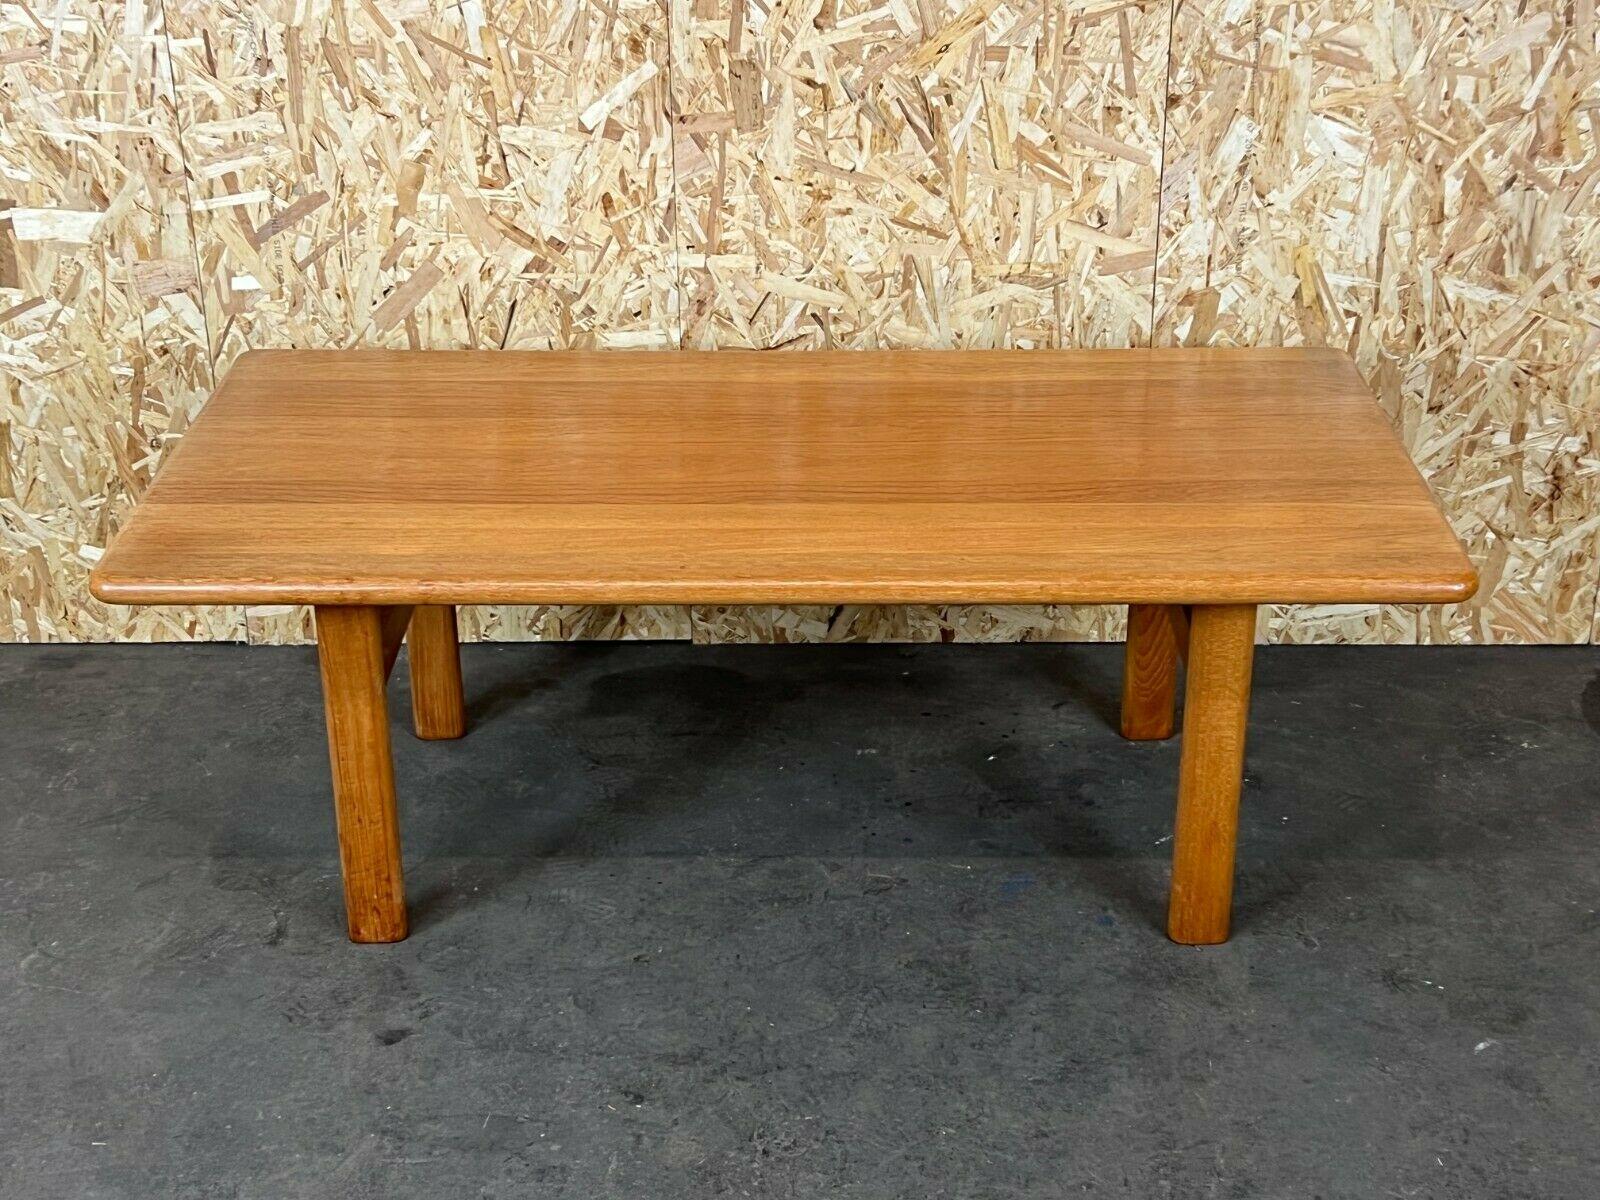 60s 70s teak coffee table Cado coffee table Danish Design Denmark

Object: coffee table

Manufacturer: Cado

Condition: good - vintage

Age: around 1960-1970

Dimensions:

140cm x 70cm x 50cm

Other notes:

The pictures serve as part